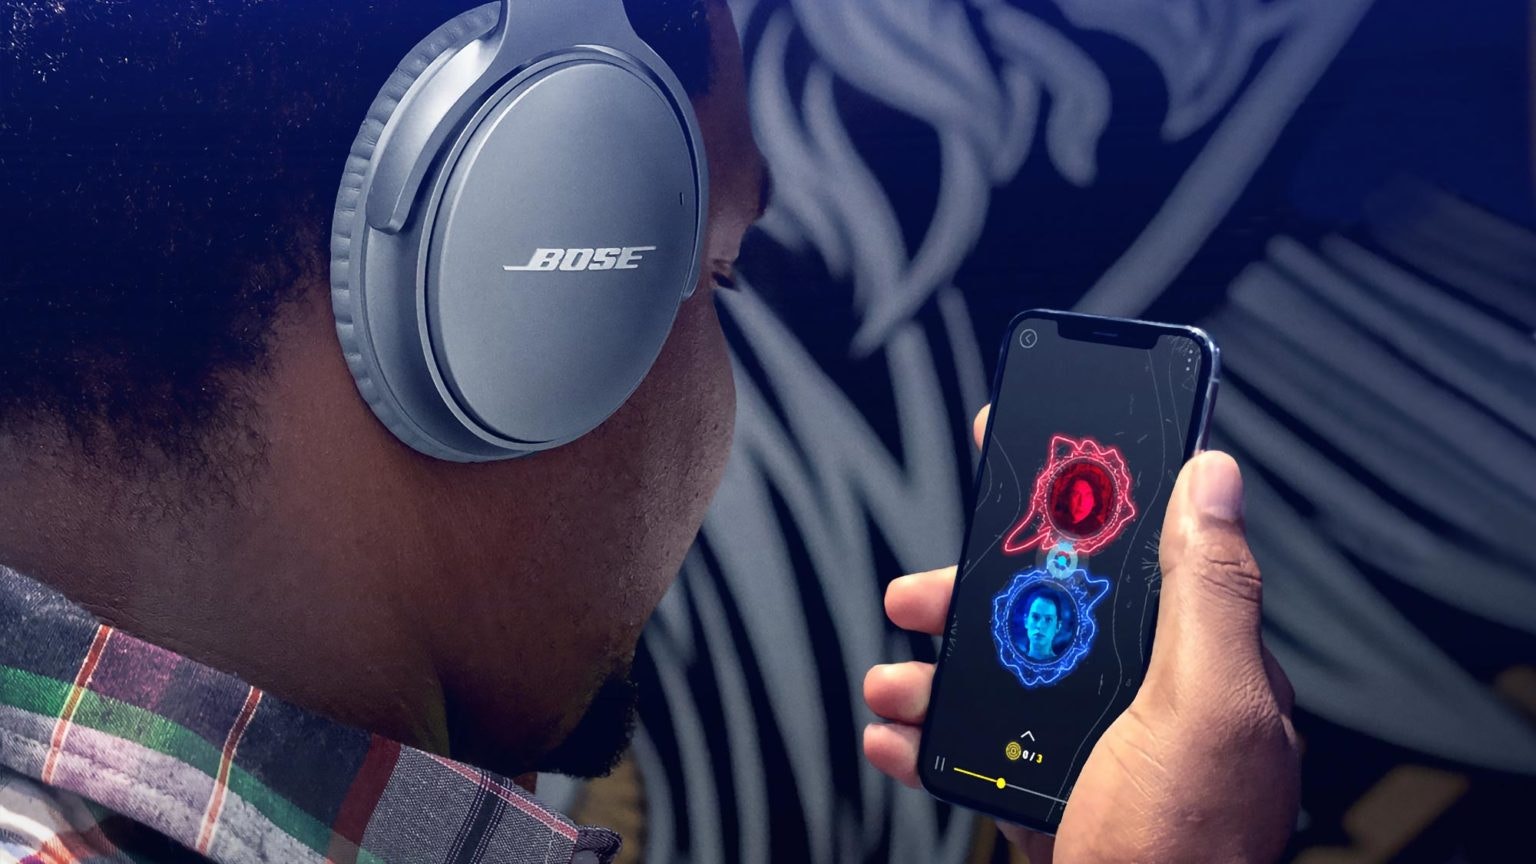 Bose and Lucasfilm Launch New "Star Wars" Audio-Augmented Reality Experience Featuring Sounds Star Wars: Galaxy's - WDW News Today